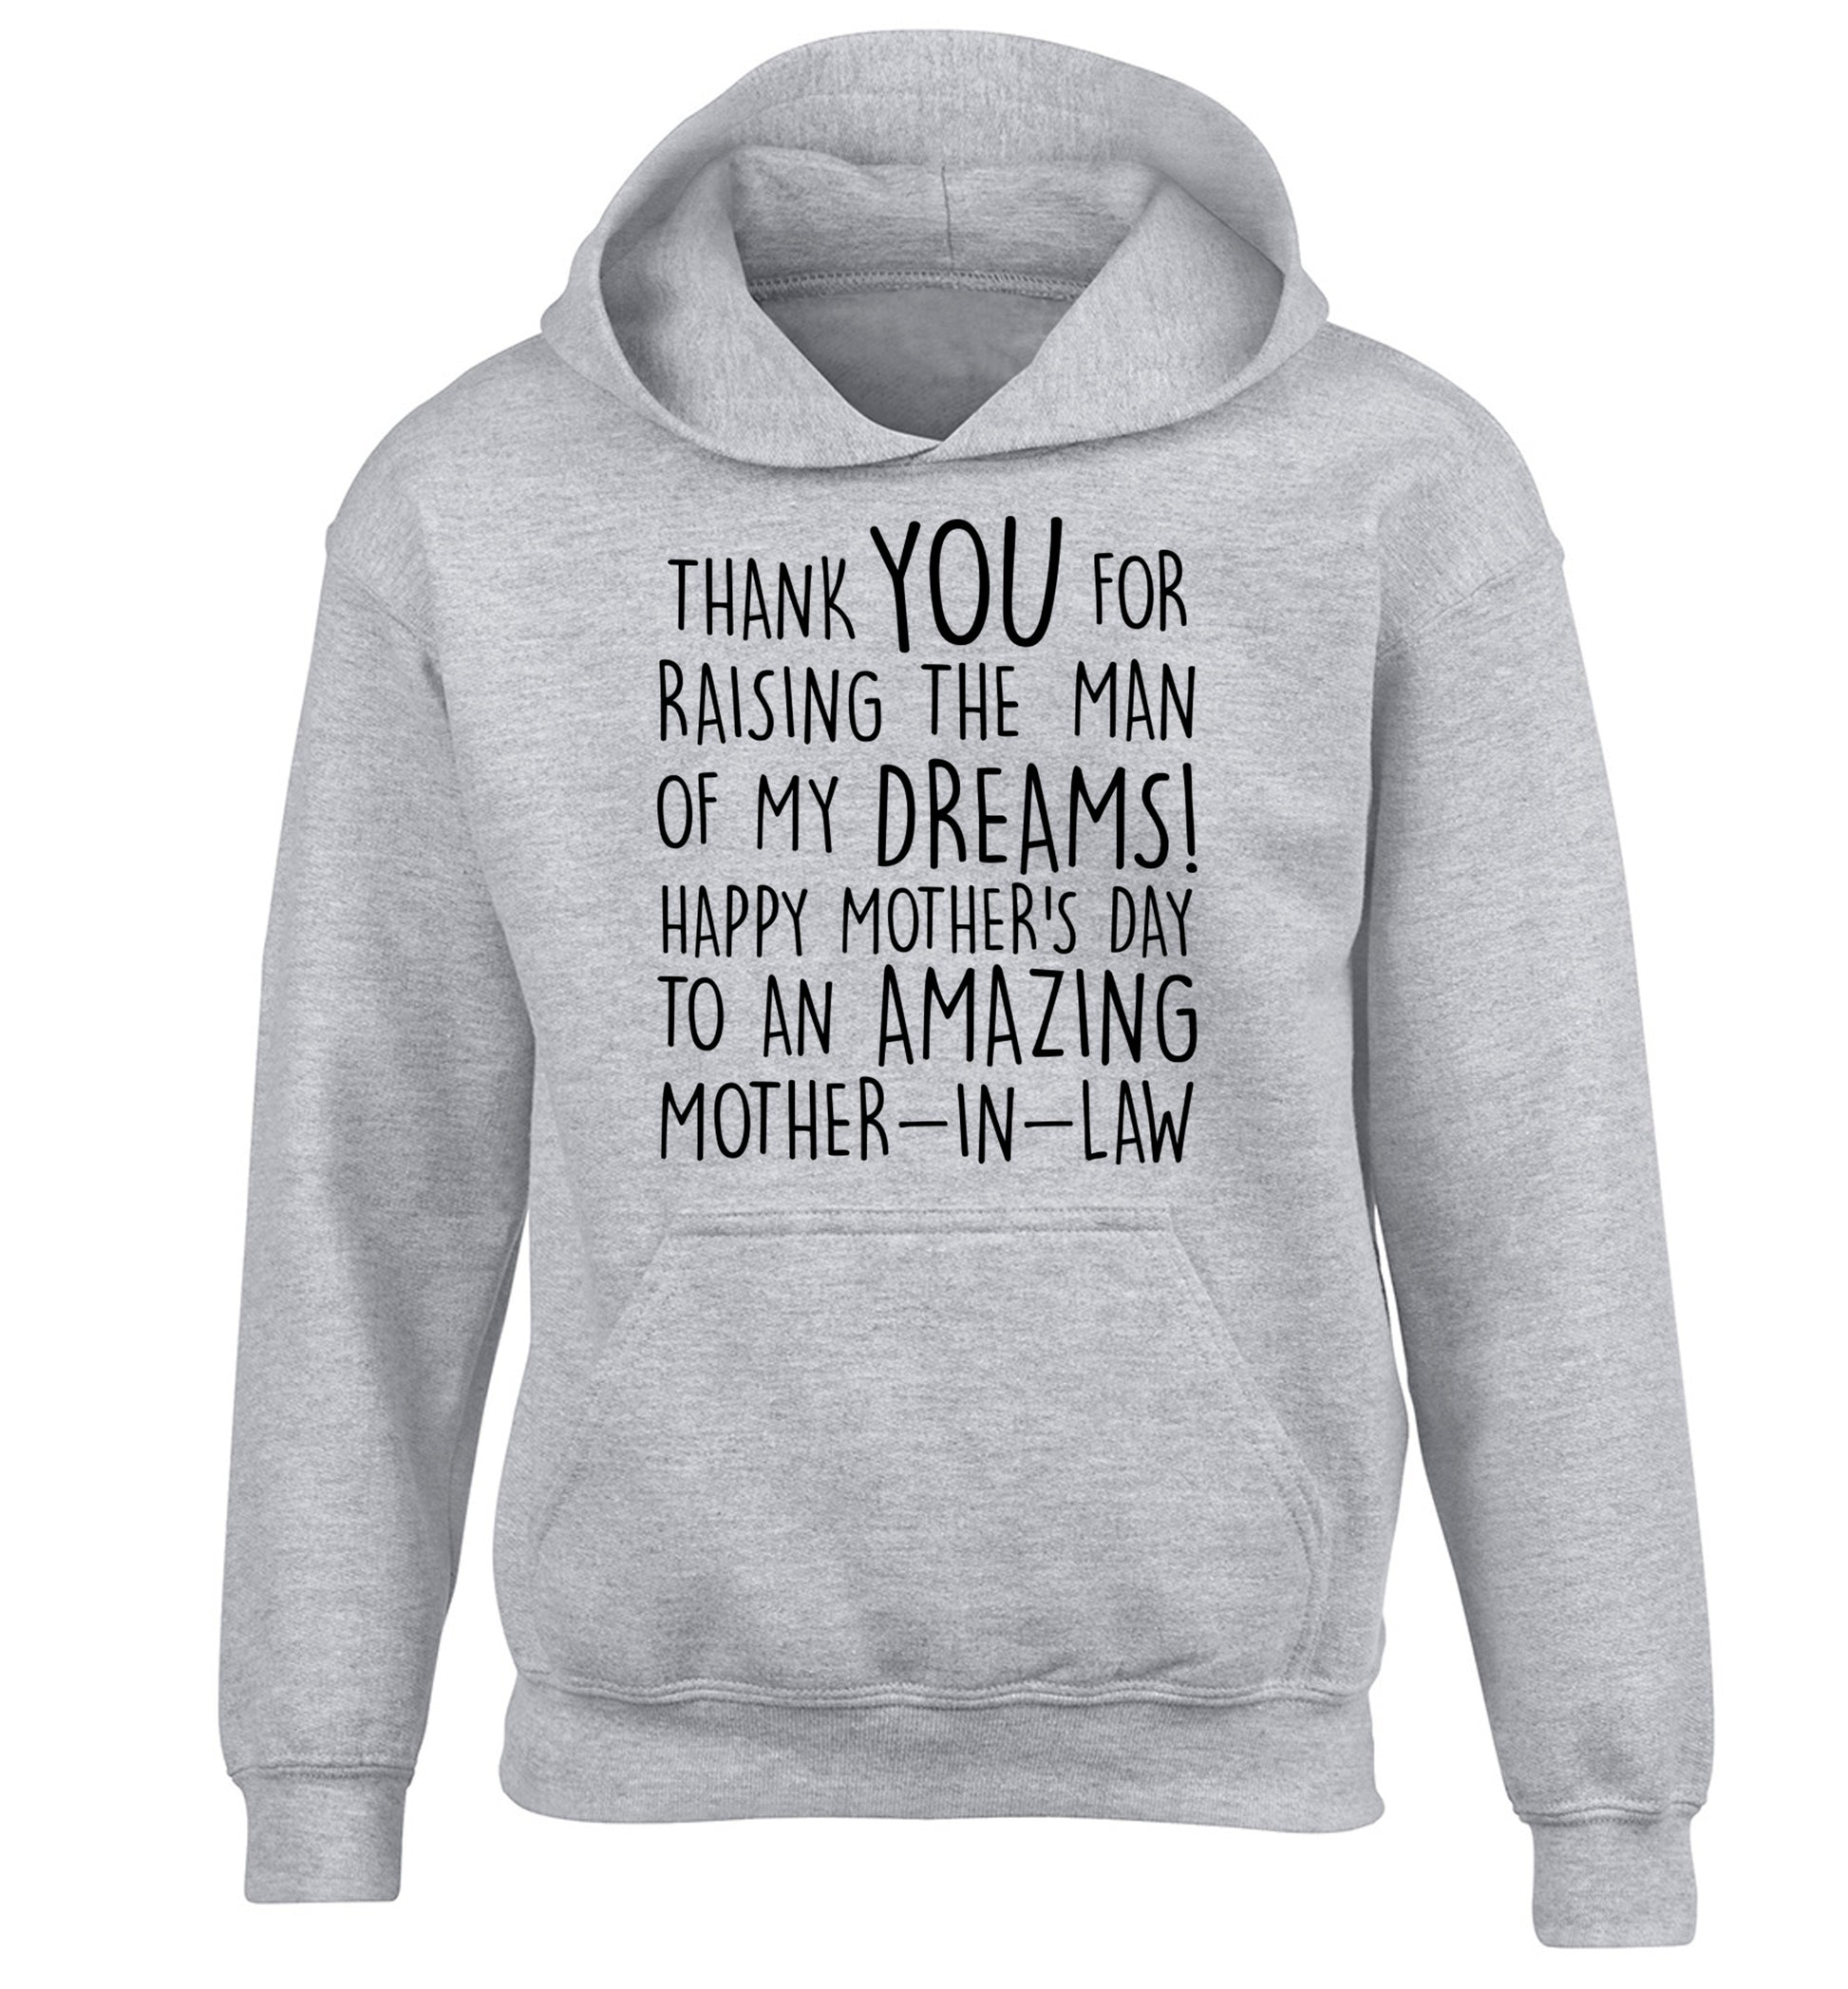 Thank you for raising the man of my dreams happy mother's day mother-in-law children's grey hoodie 12-13 Years